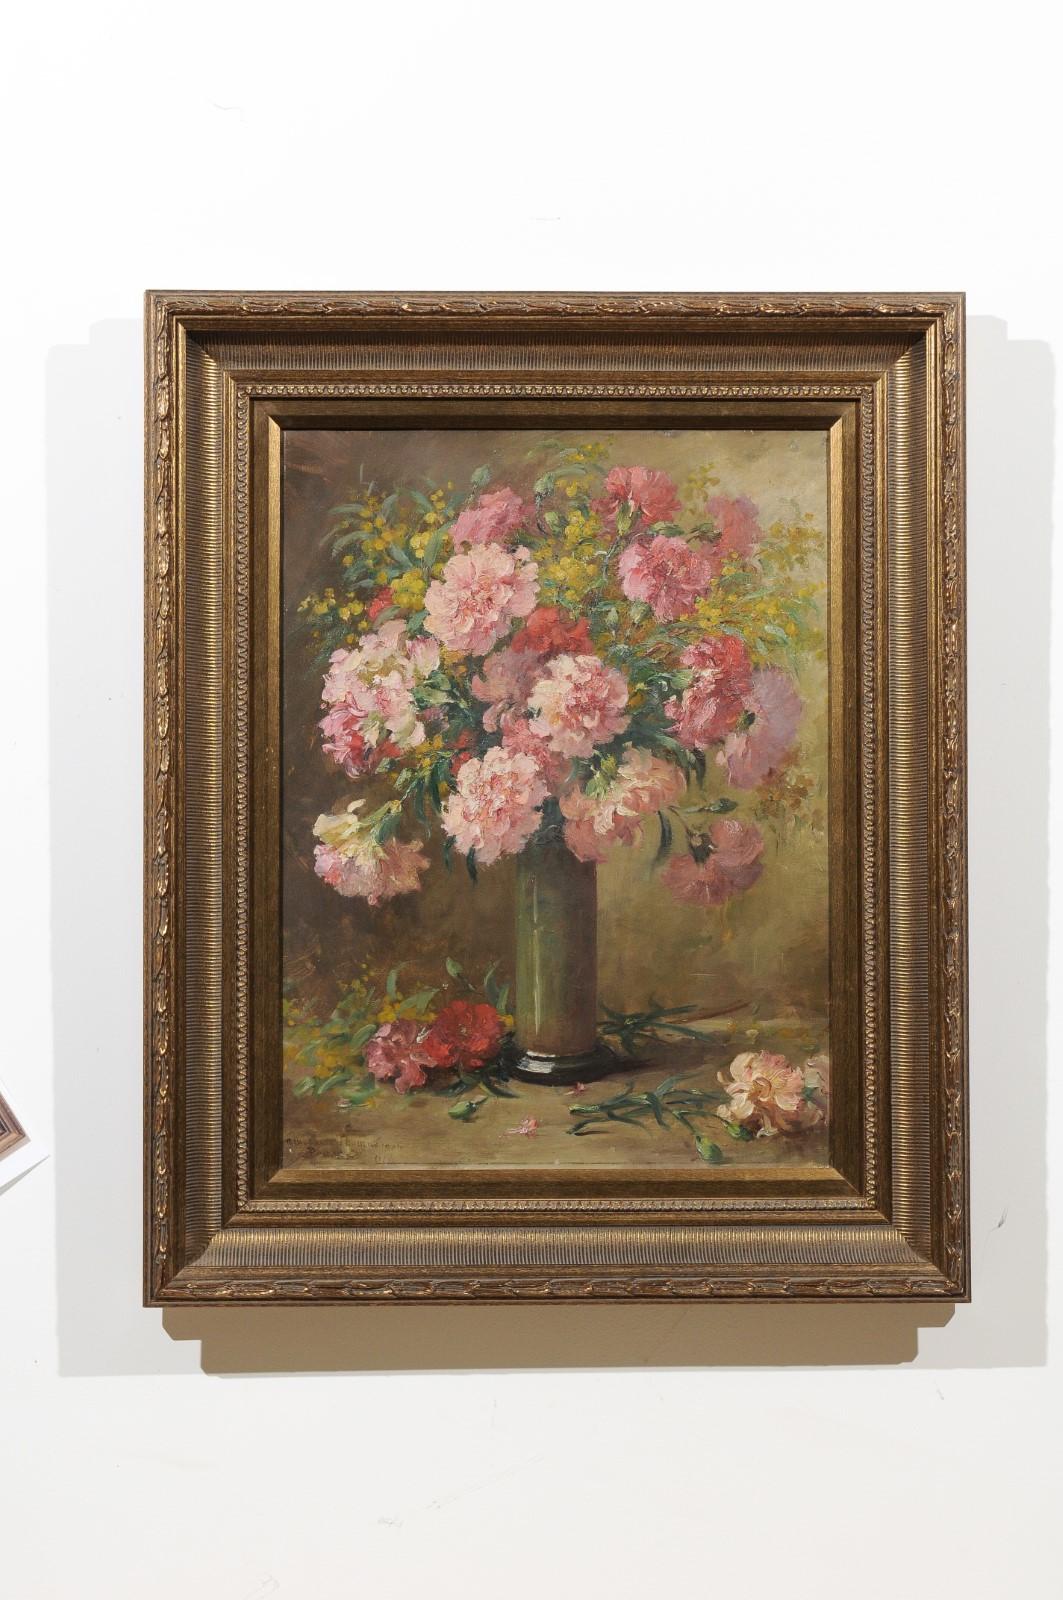 A French floral still-life oil on canvas painting from the 19th century, set inside a giltwood frame. This French still-life painting features an exquisite bouquet of pink flowers displayed in an elegant tall vase. The various shades of pink that